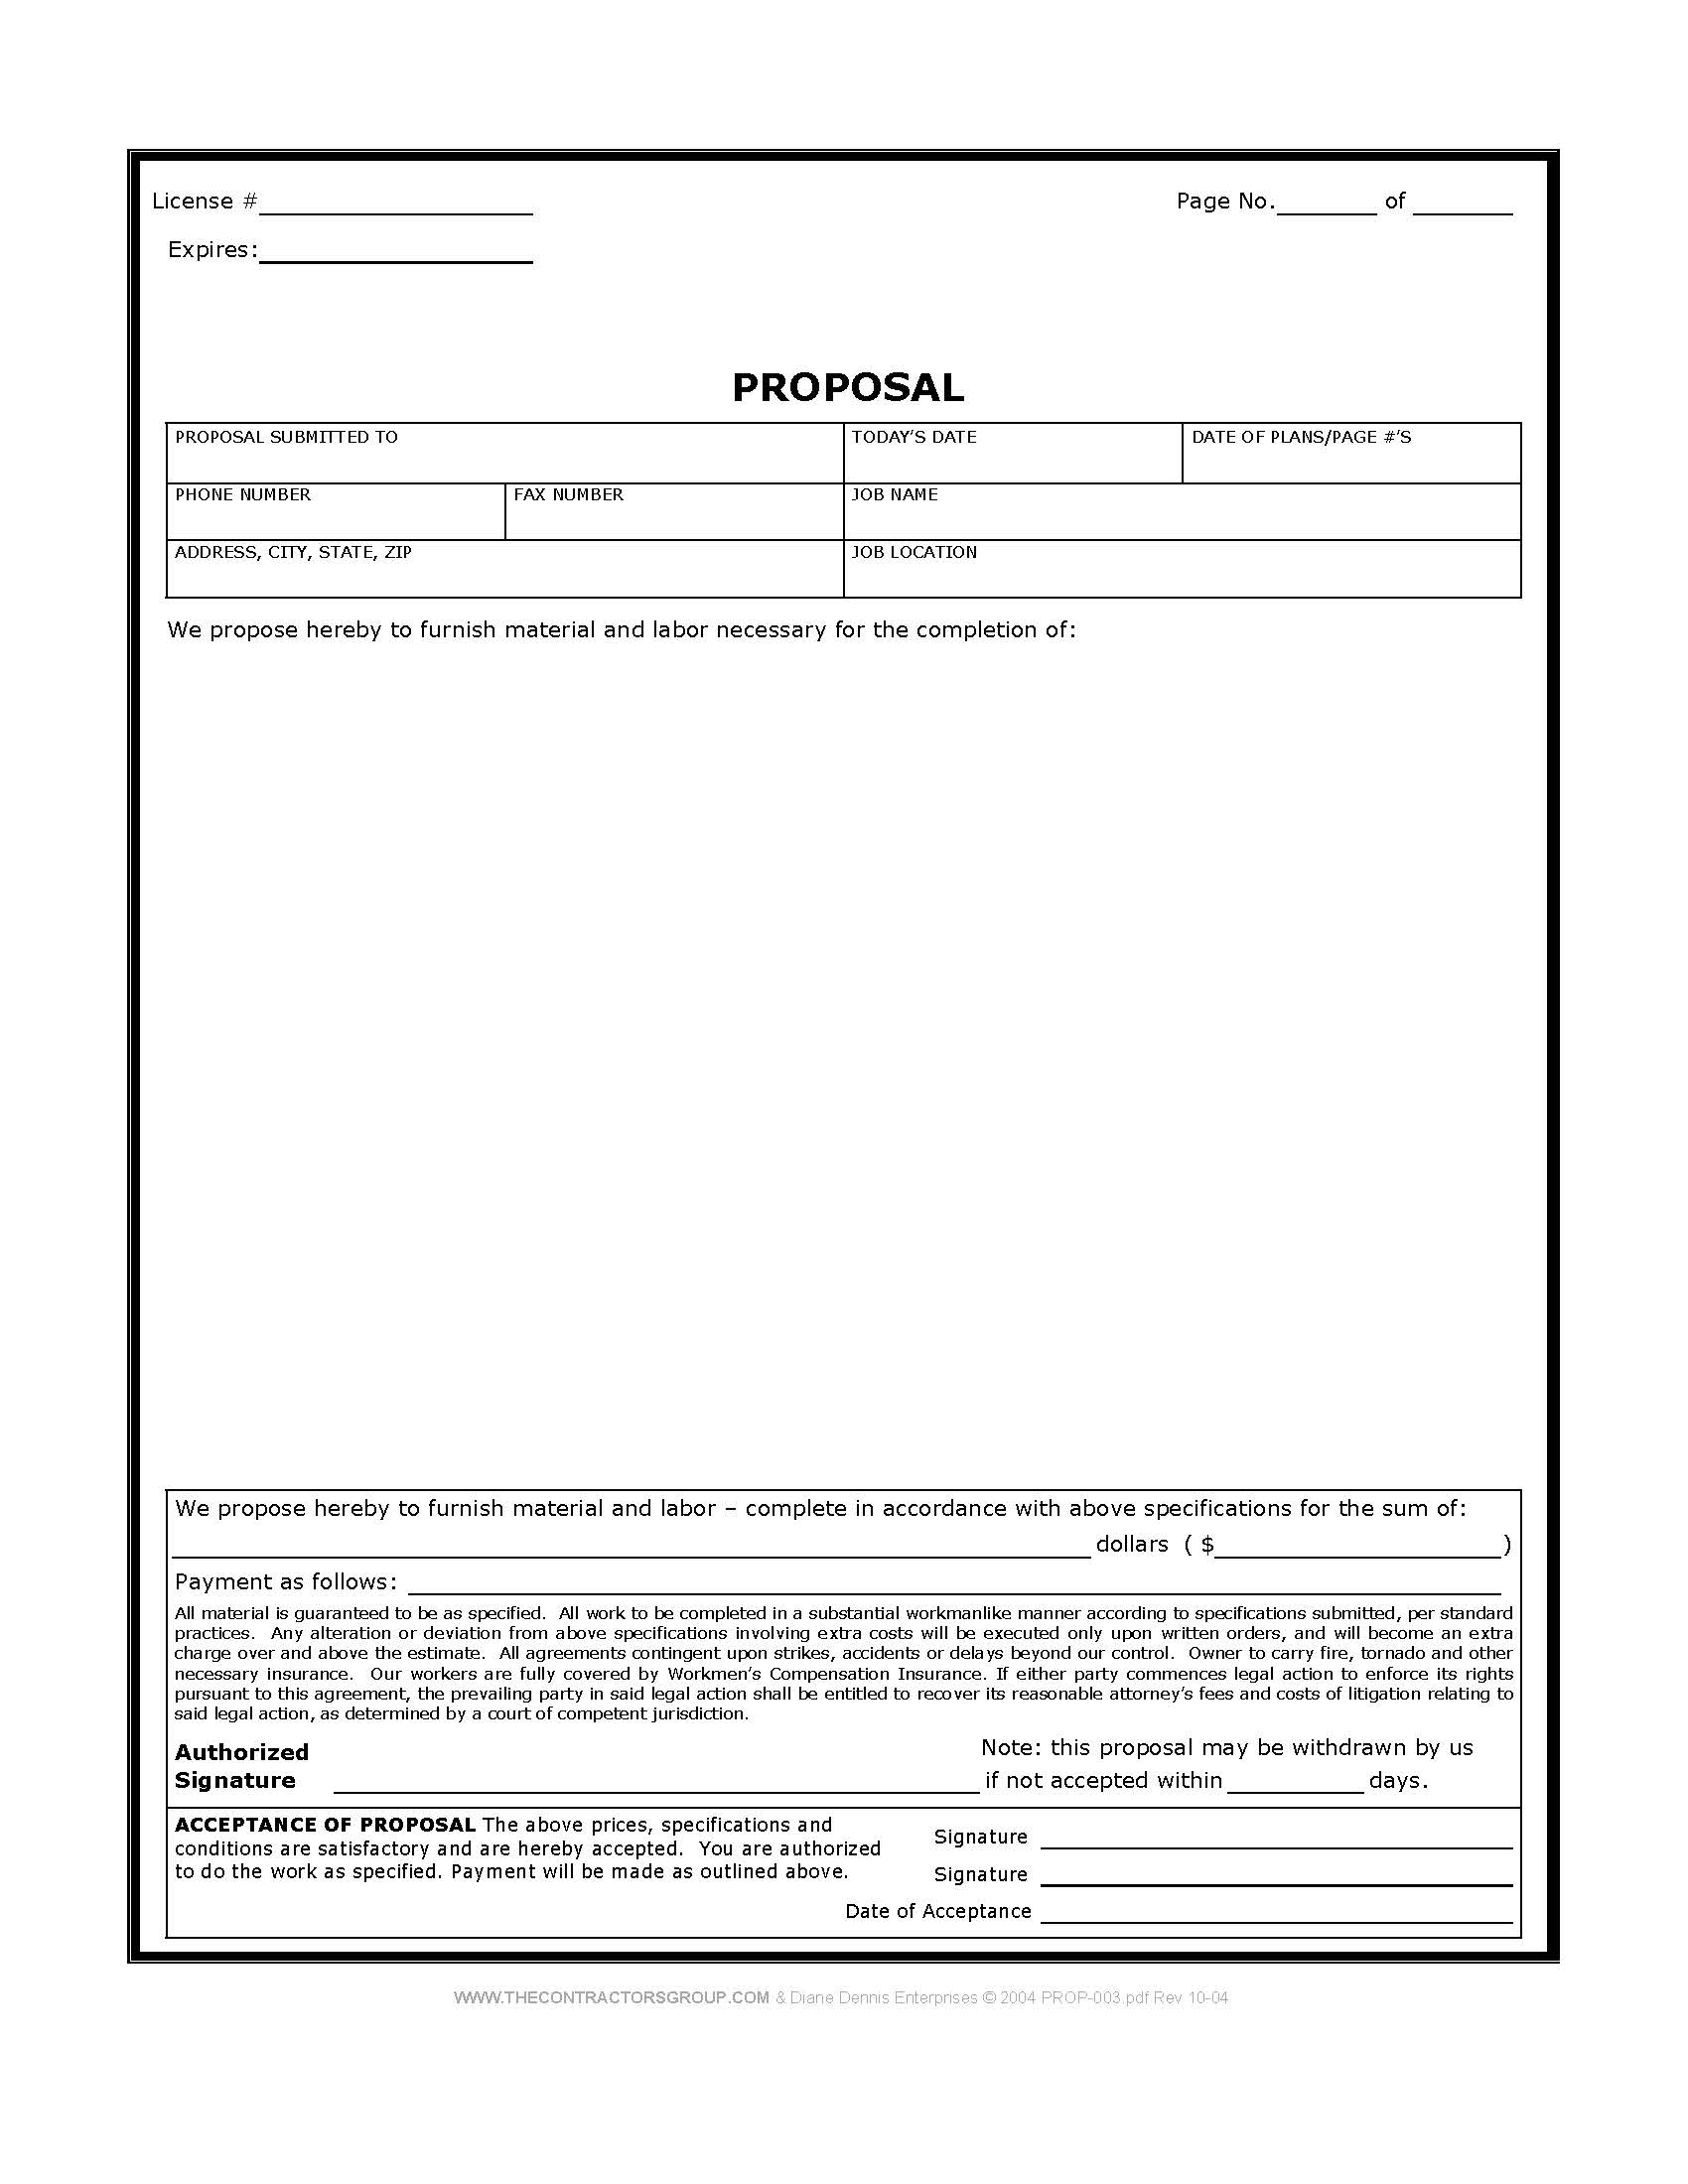 Image of Fillable Proposal Form